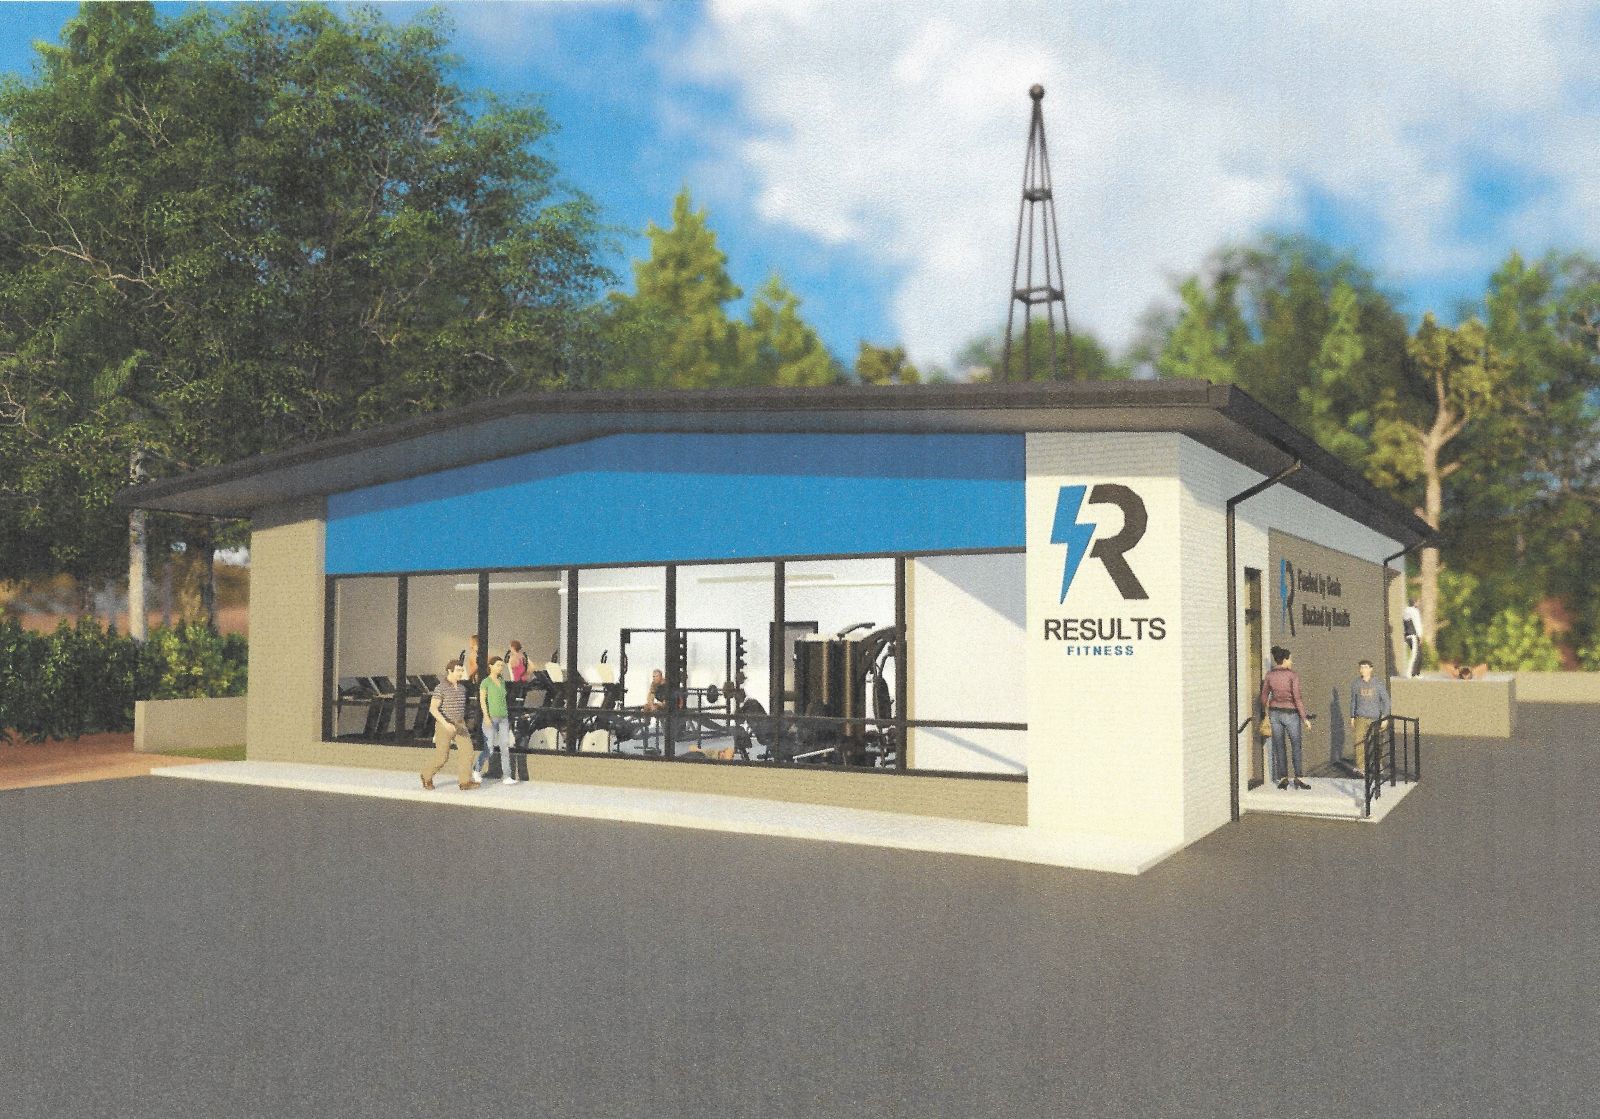 A n adaptive reuse project spearheaded by Cason Development Group is transforming a building off Garners Ferry Road vacant for more than a decade into a fitness center. (Rendering/Provided)